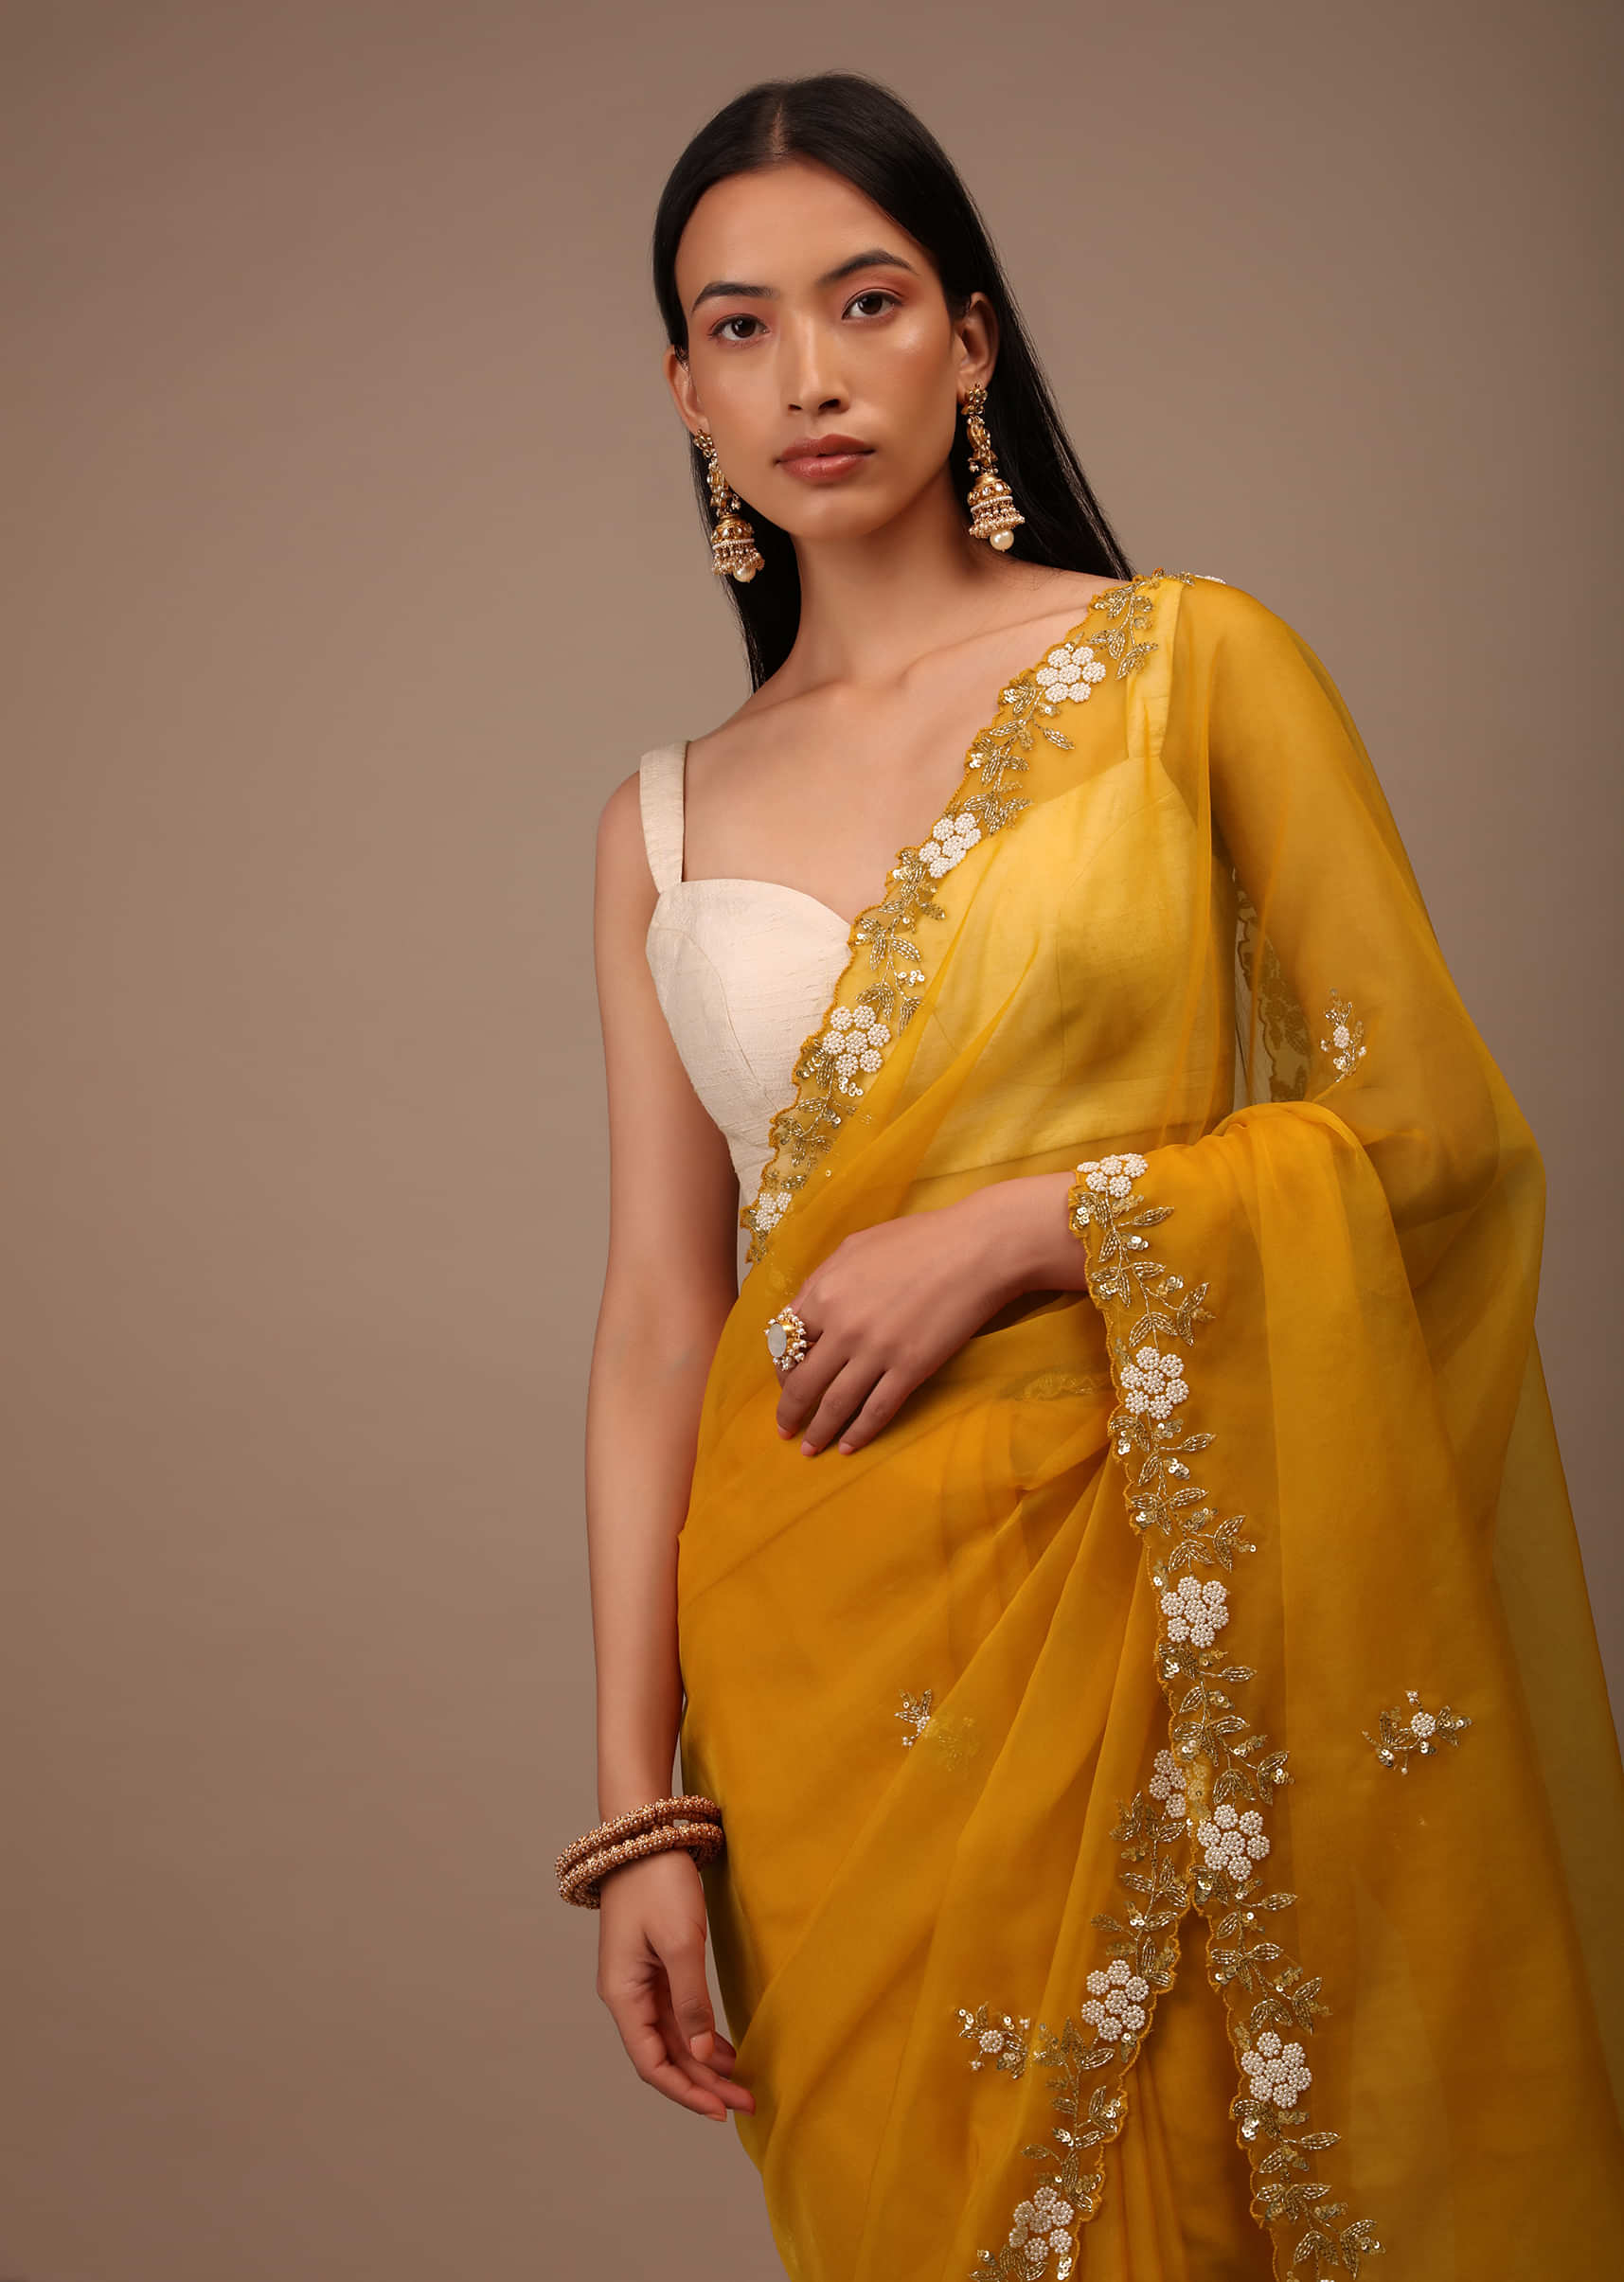 Butterscotch Yellow Saree In Organza With Hand Embroidered Moti And Cut Dana Work On The Border And Butti Design